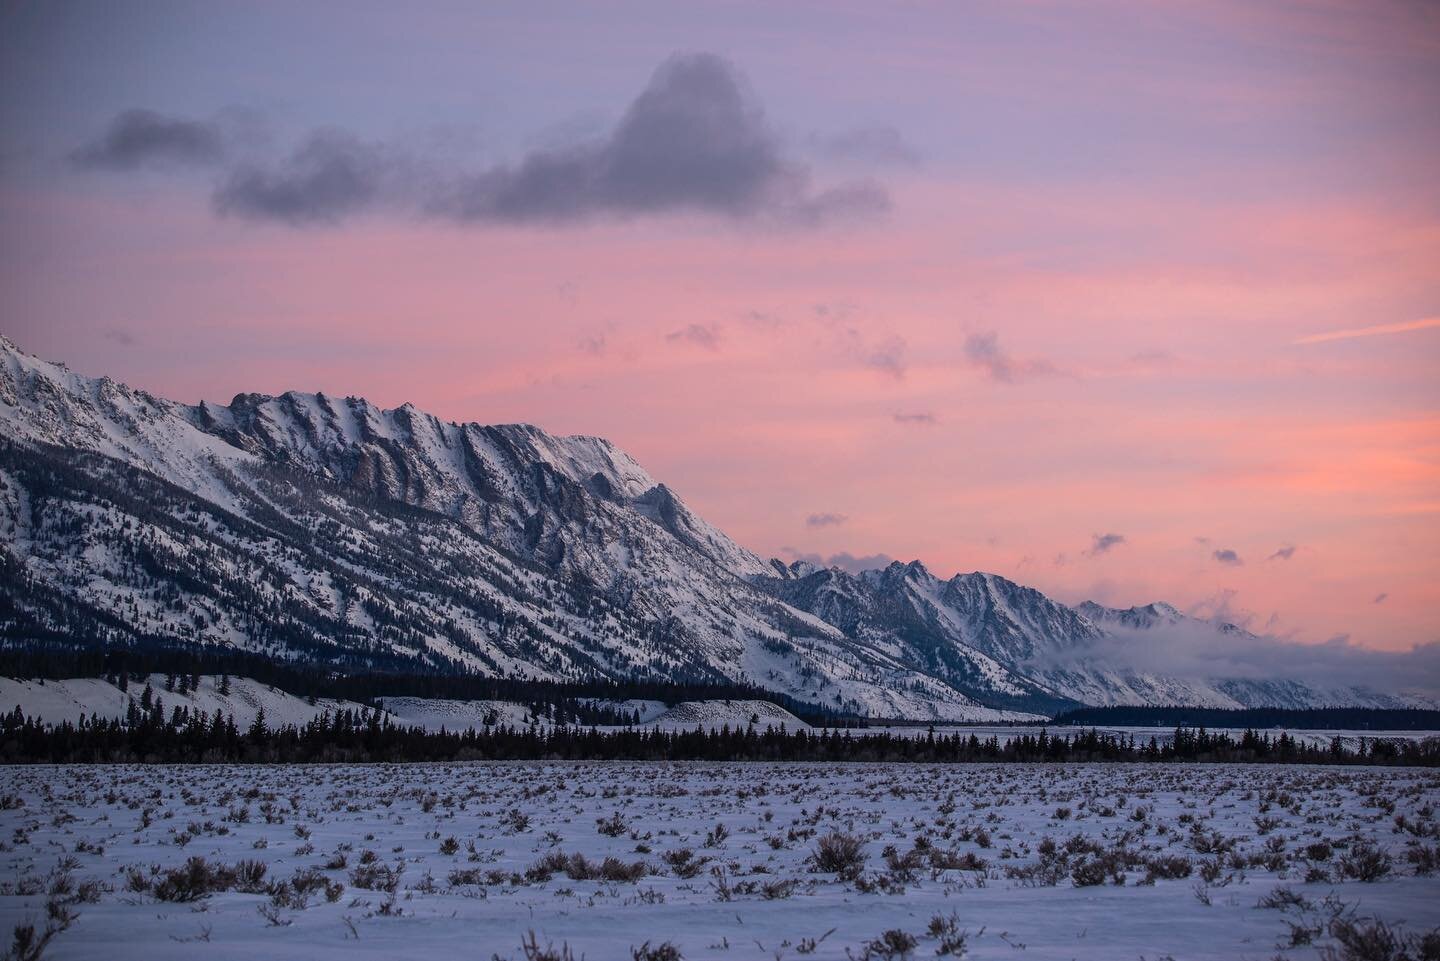 Taken just before sunrise in GTNP. If you know me you probably know I&rsquo;m not much of a morning person but watching this sunrise was well worth the early wake up
.
.
.
#discover_wyoming #visitwyoming #visitjacksonhole #jhstyle #thatswy #staywildj